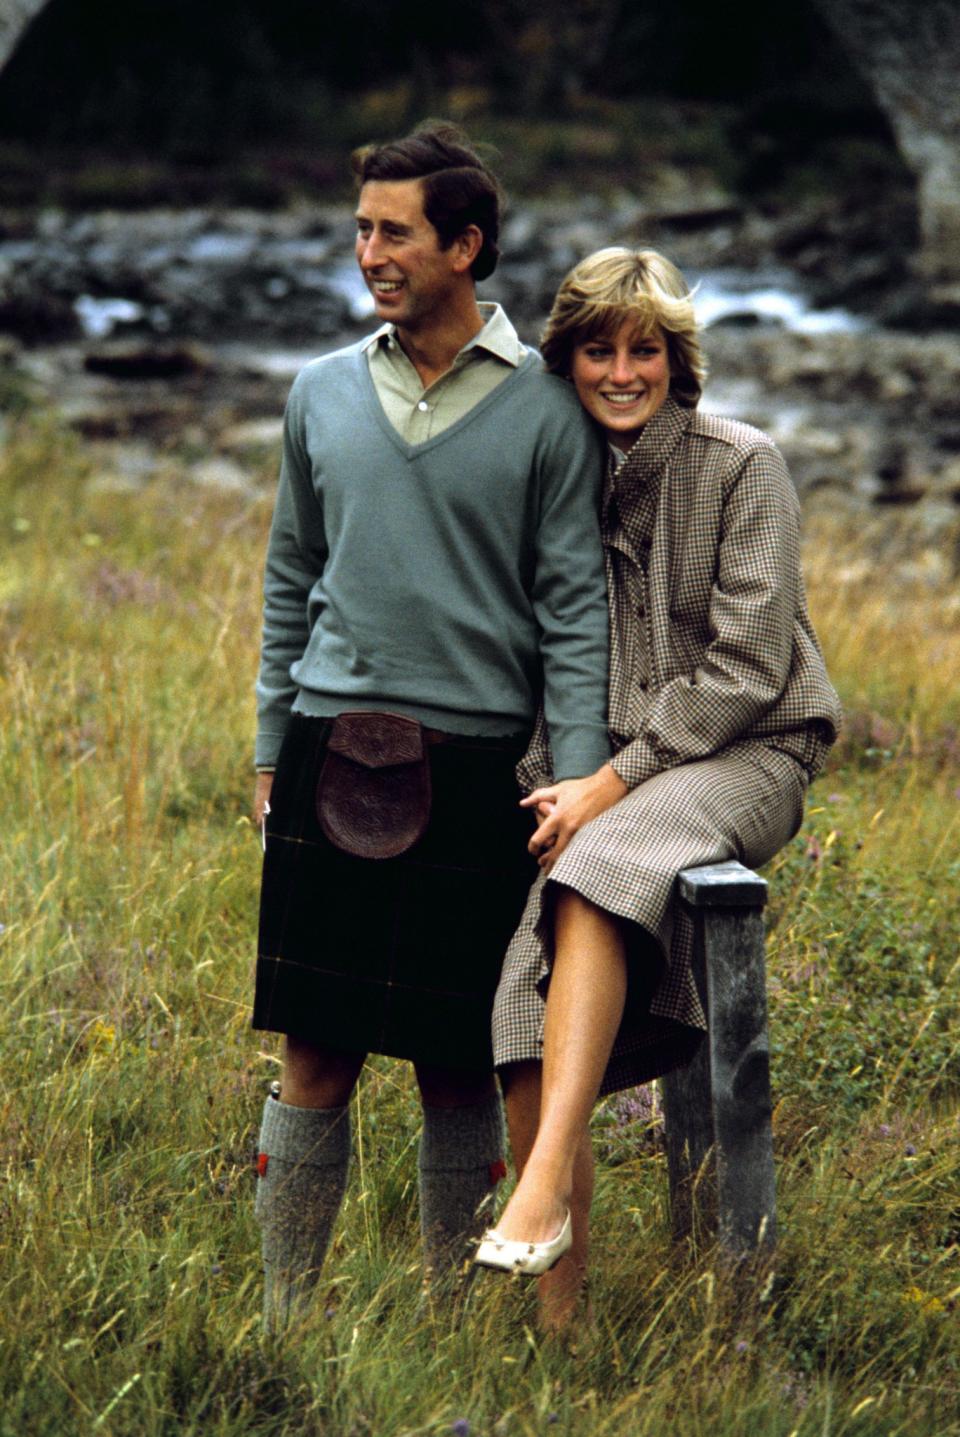 On her honeymoon at Balmoral in Scotland in August 1981.